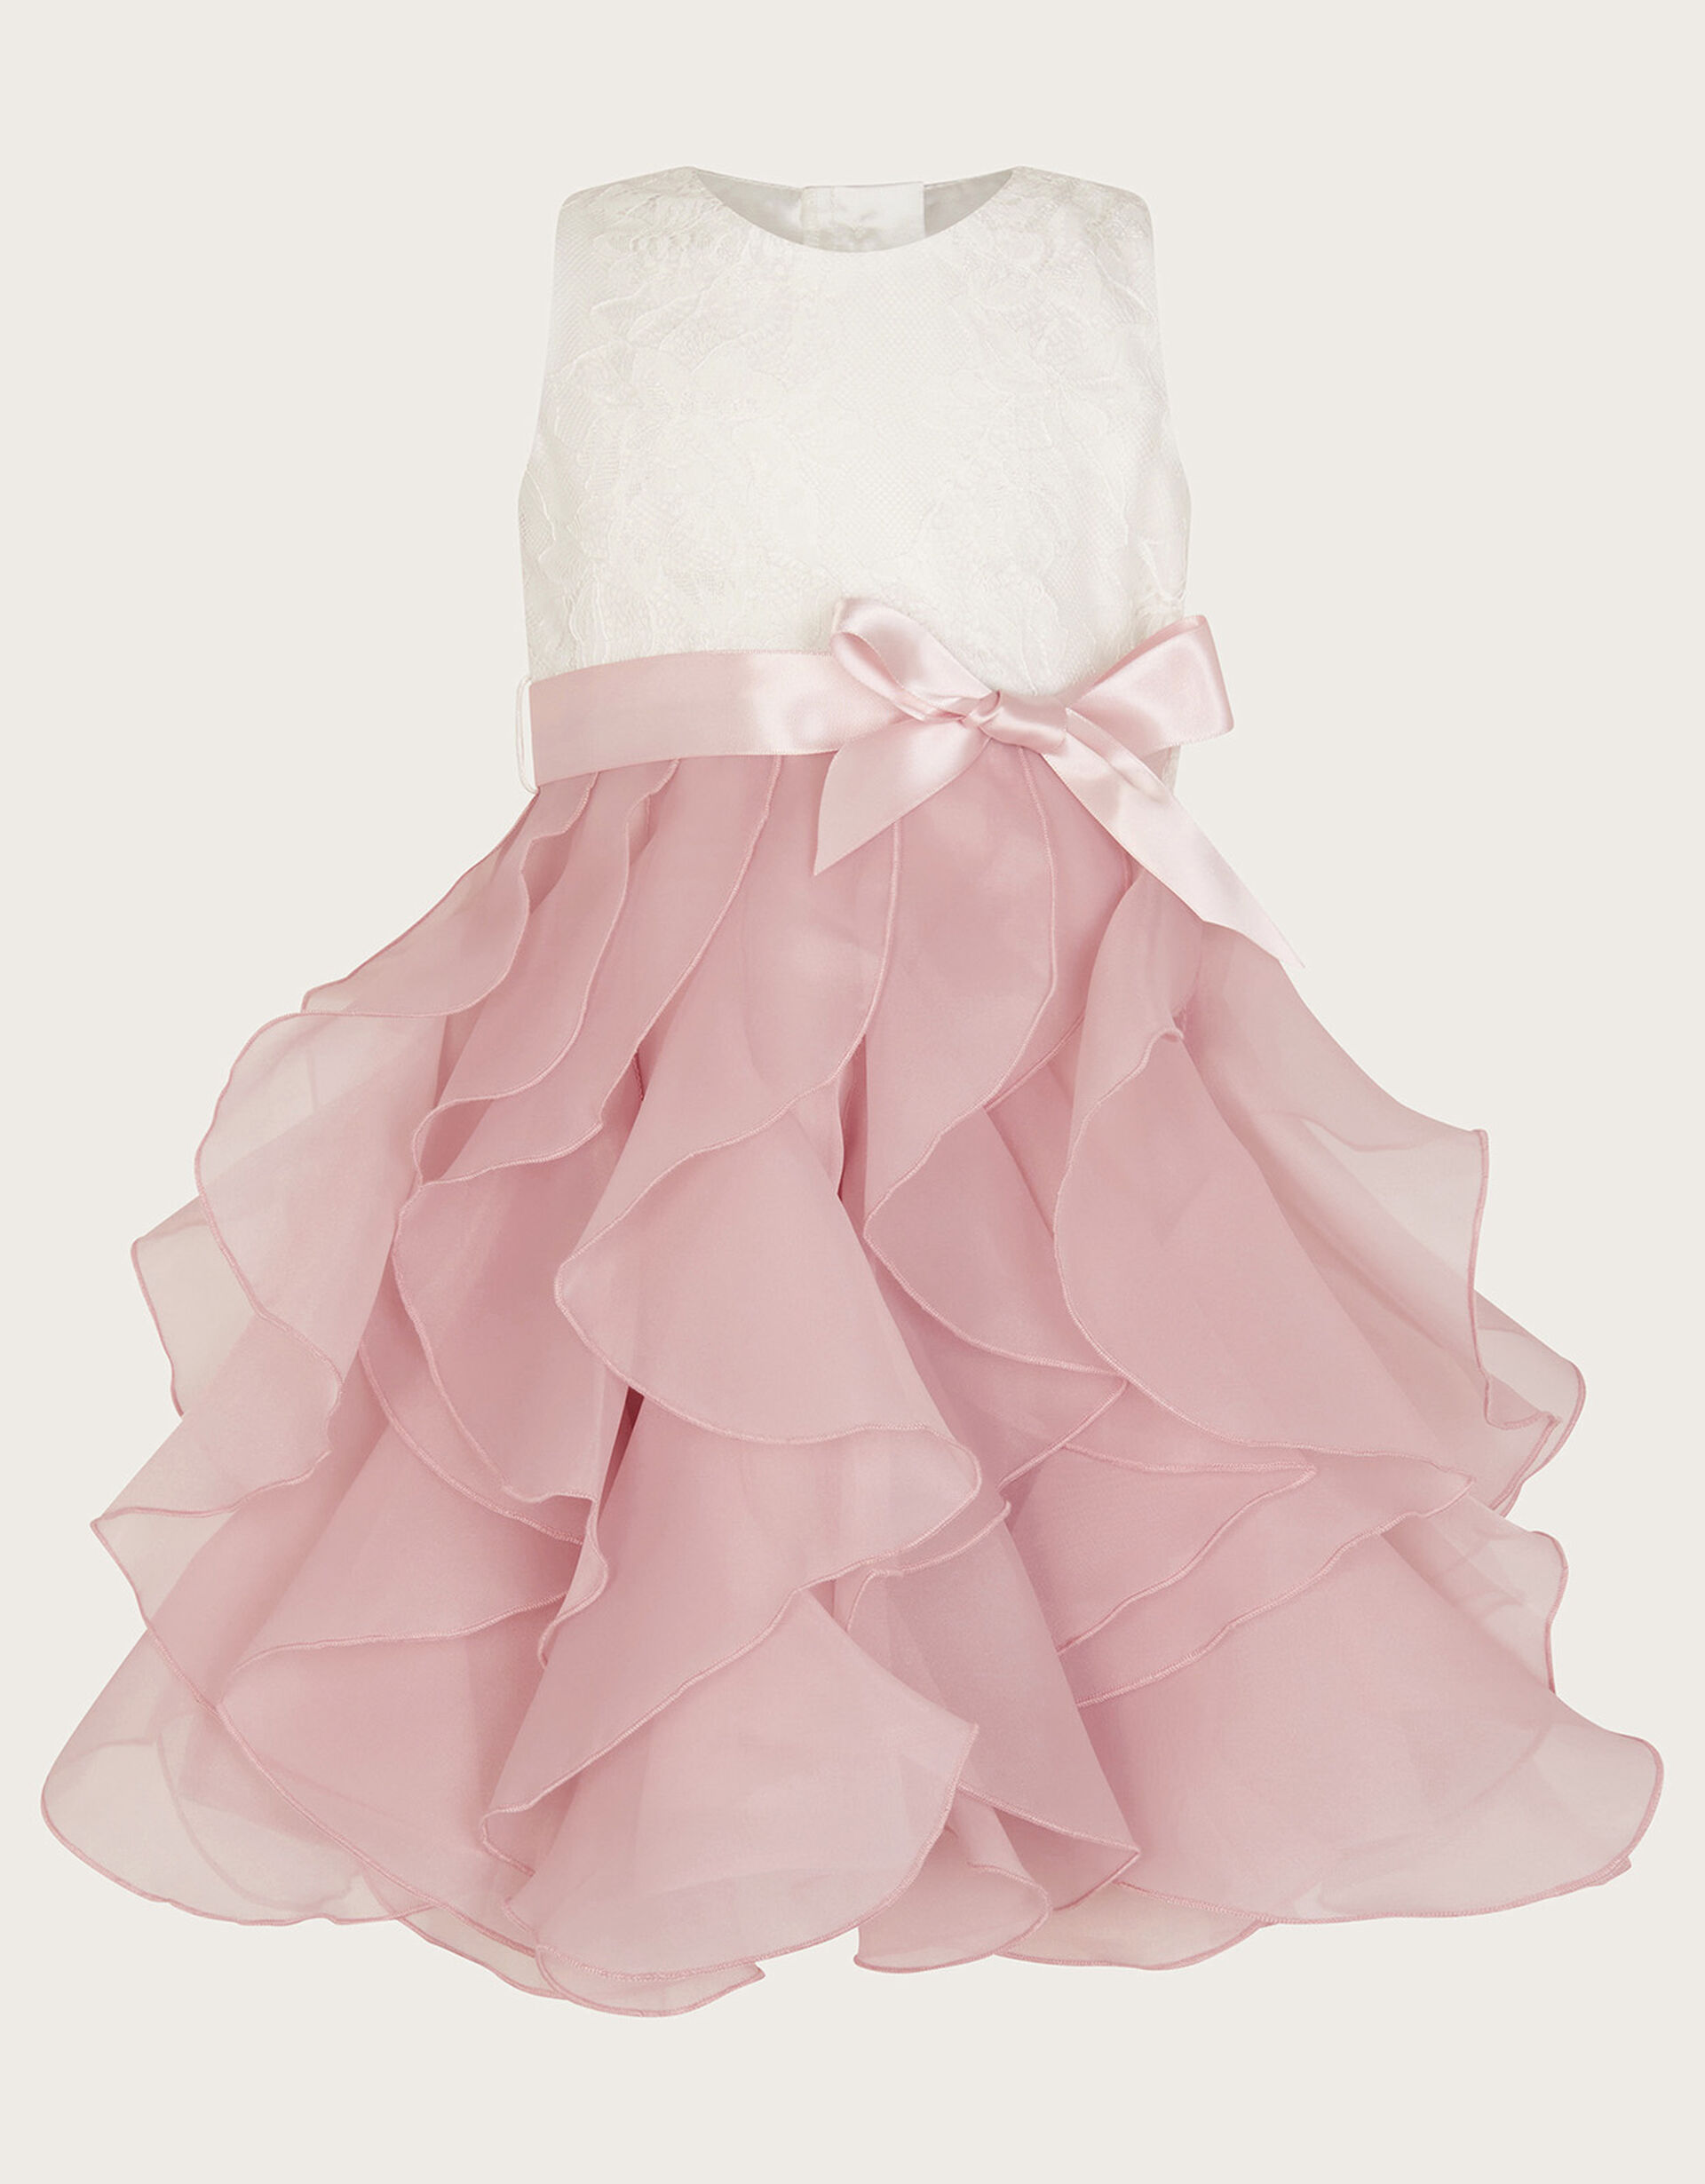 Baby Lace Cancan Ruffle Dress Pink, Baby Girl Dresses